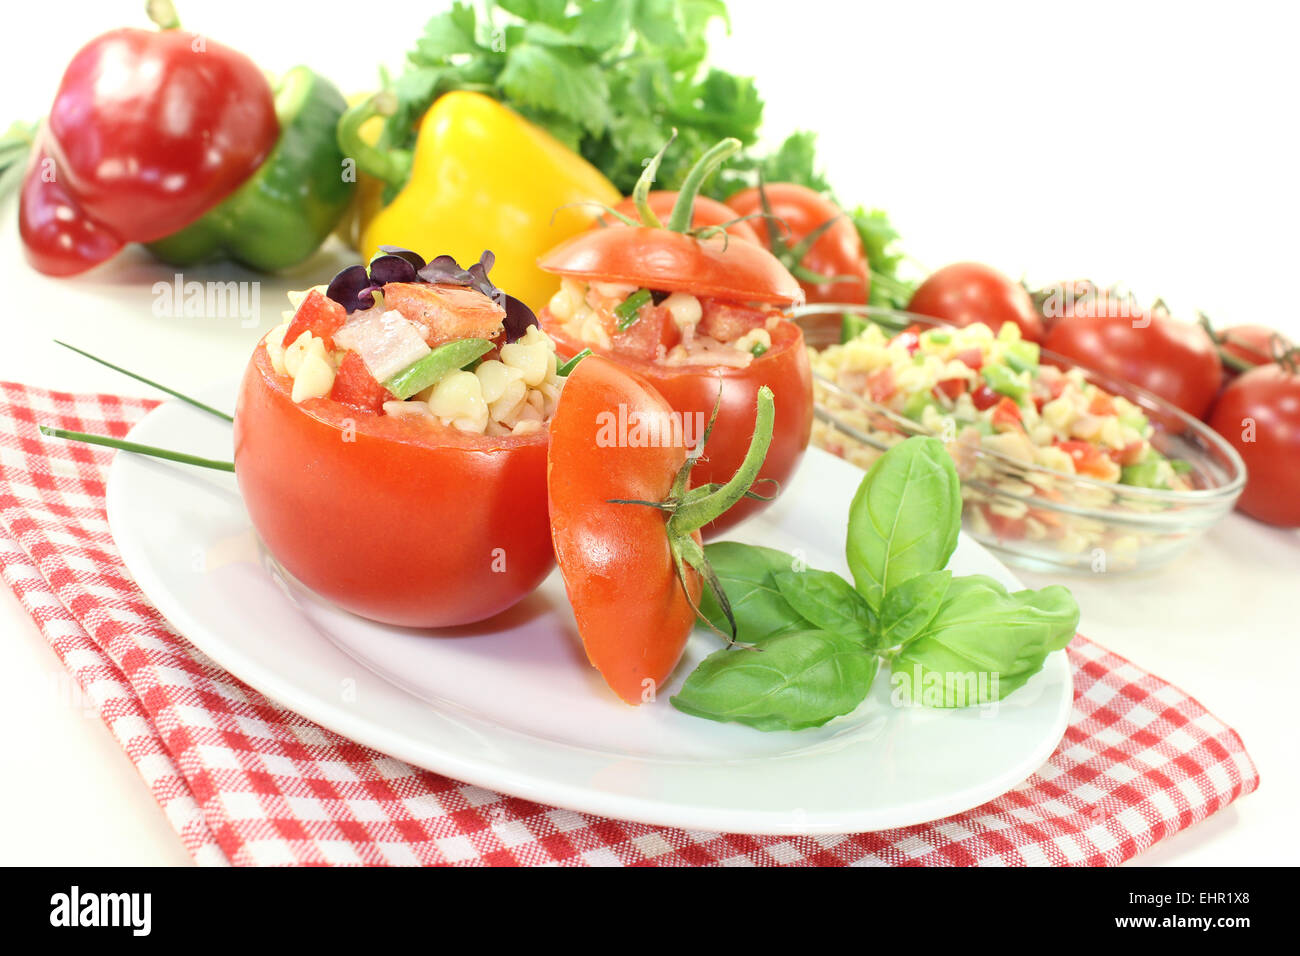 stuffed tomatoes with pasta salad and pepper Stock Photo